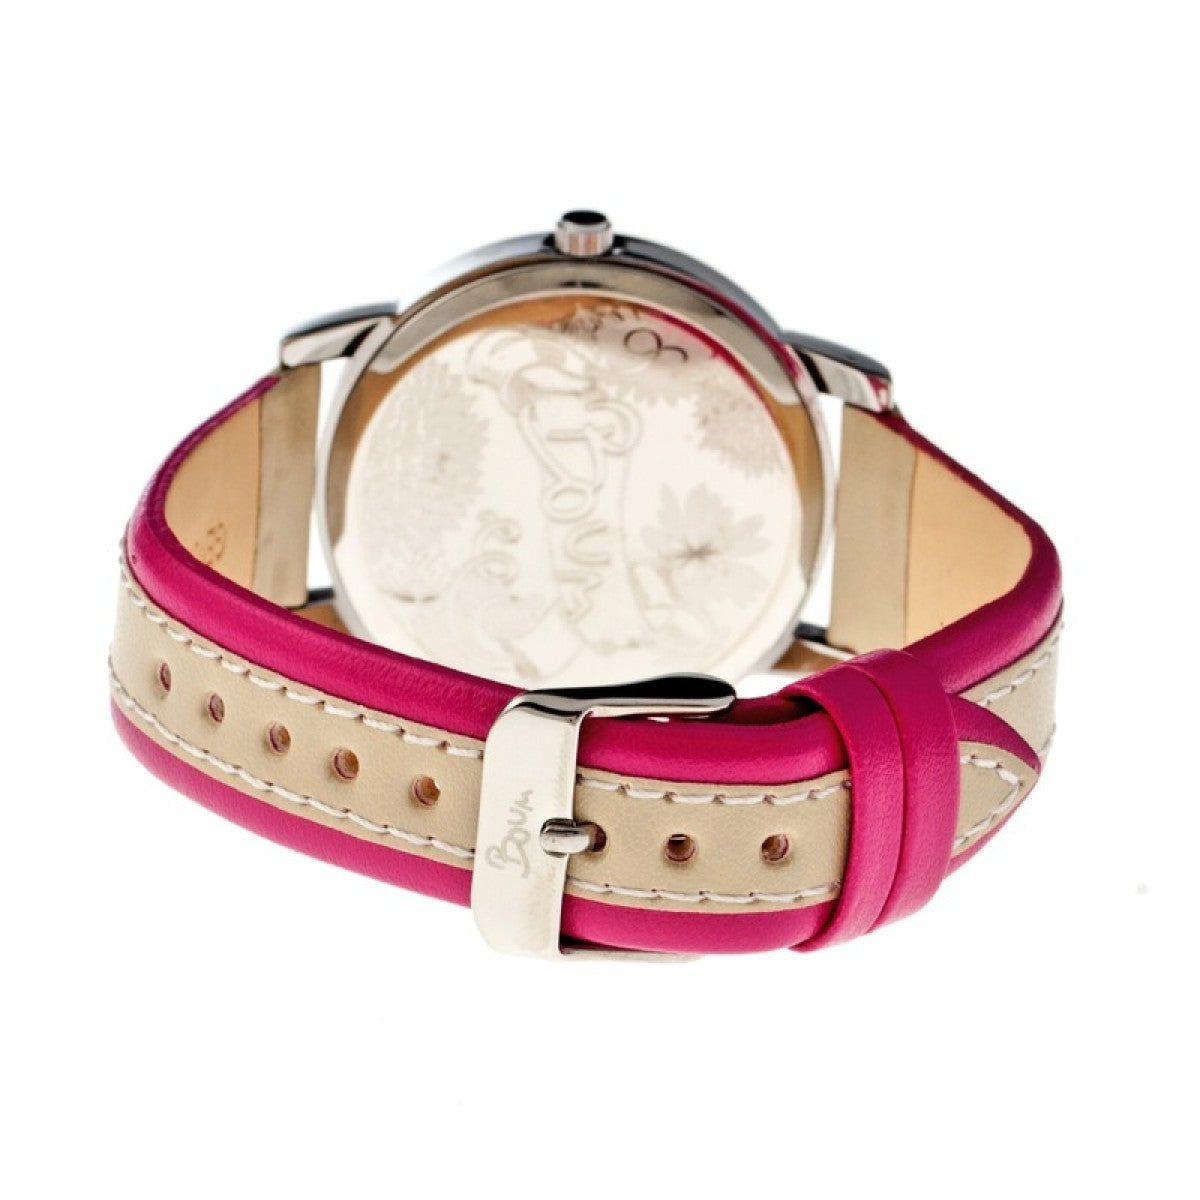 Boum Contraire Two-Tone Leather-Band Ladies Watch - Silver/Pink - BOUBM2201